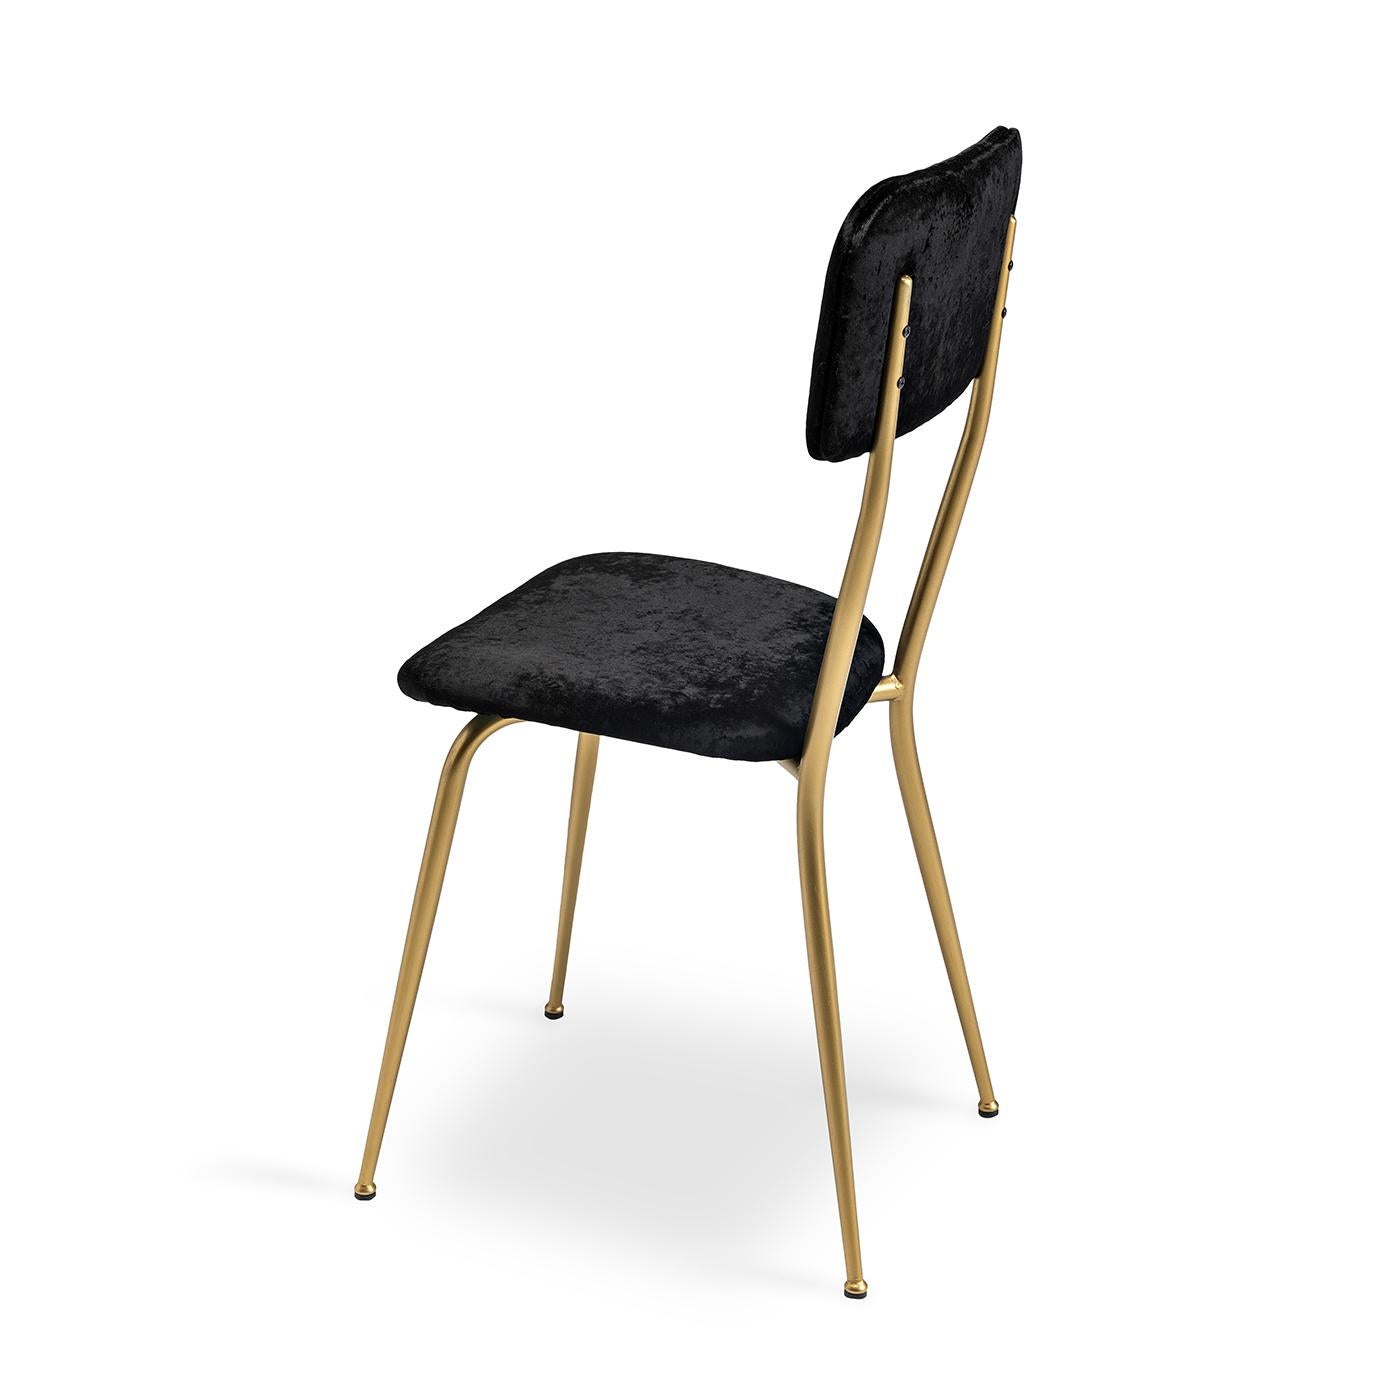 Sleek and sophisticated, the Miss Ava 10 Chair is characterised by an understated metal frame with a brushed brass finish. Both the seat and backrest are upholstered in slate velvet fabric, filled with foam padding for optimal comfort. Exuding a